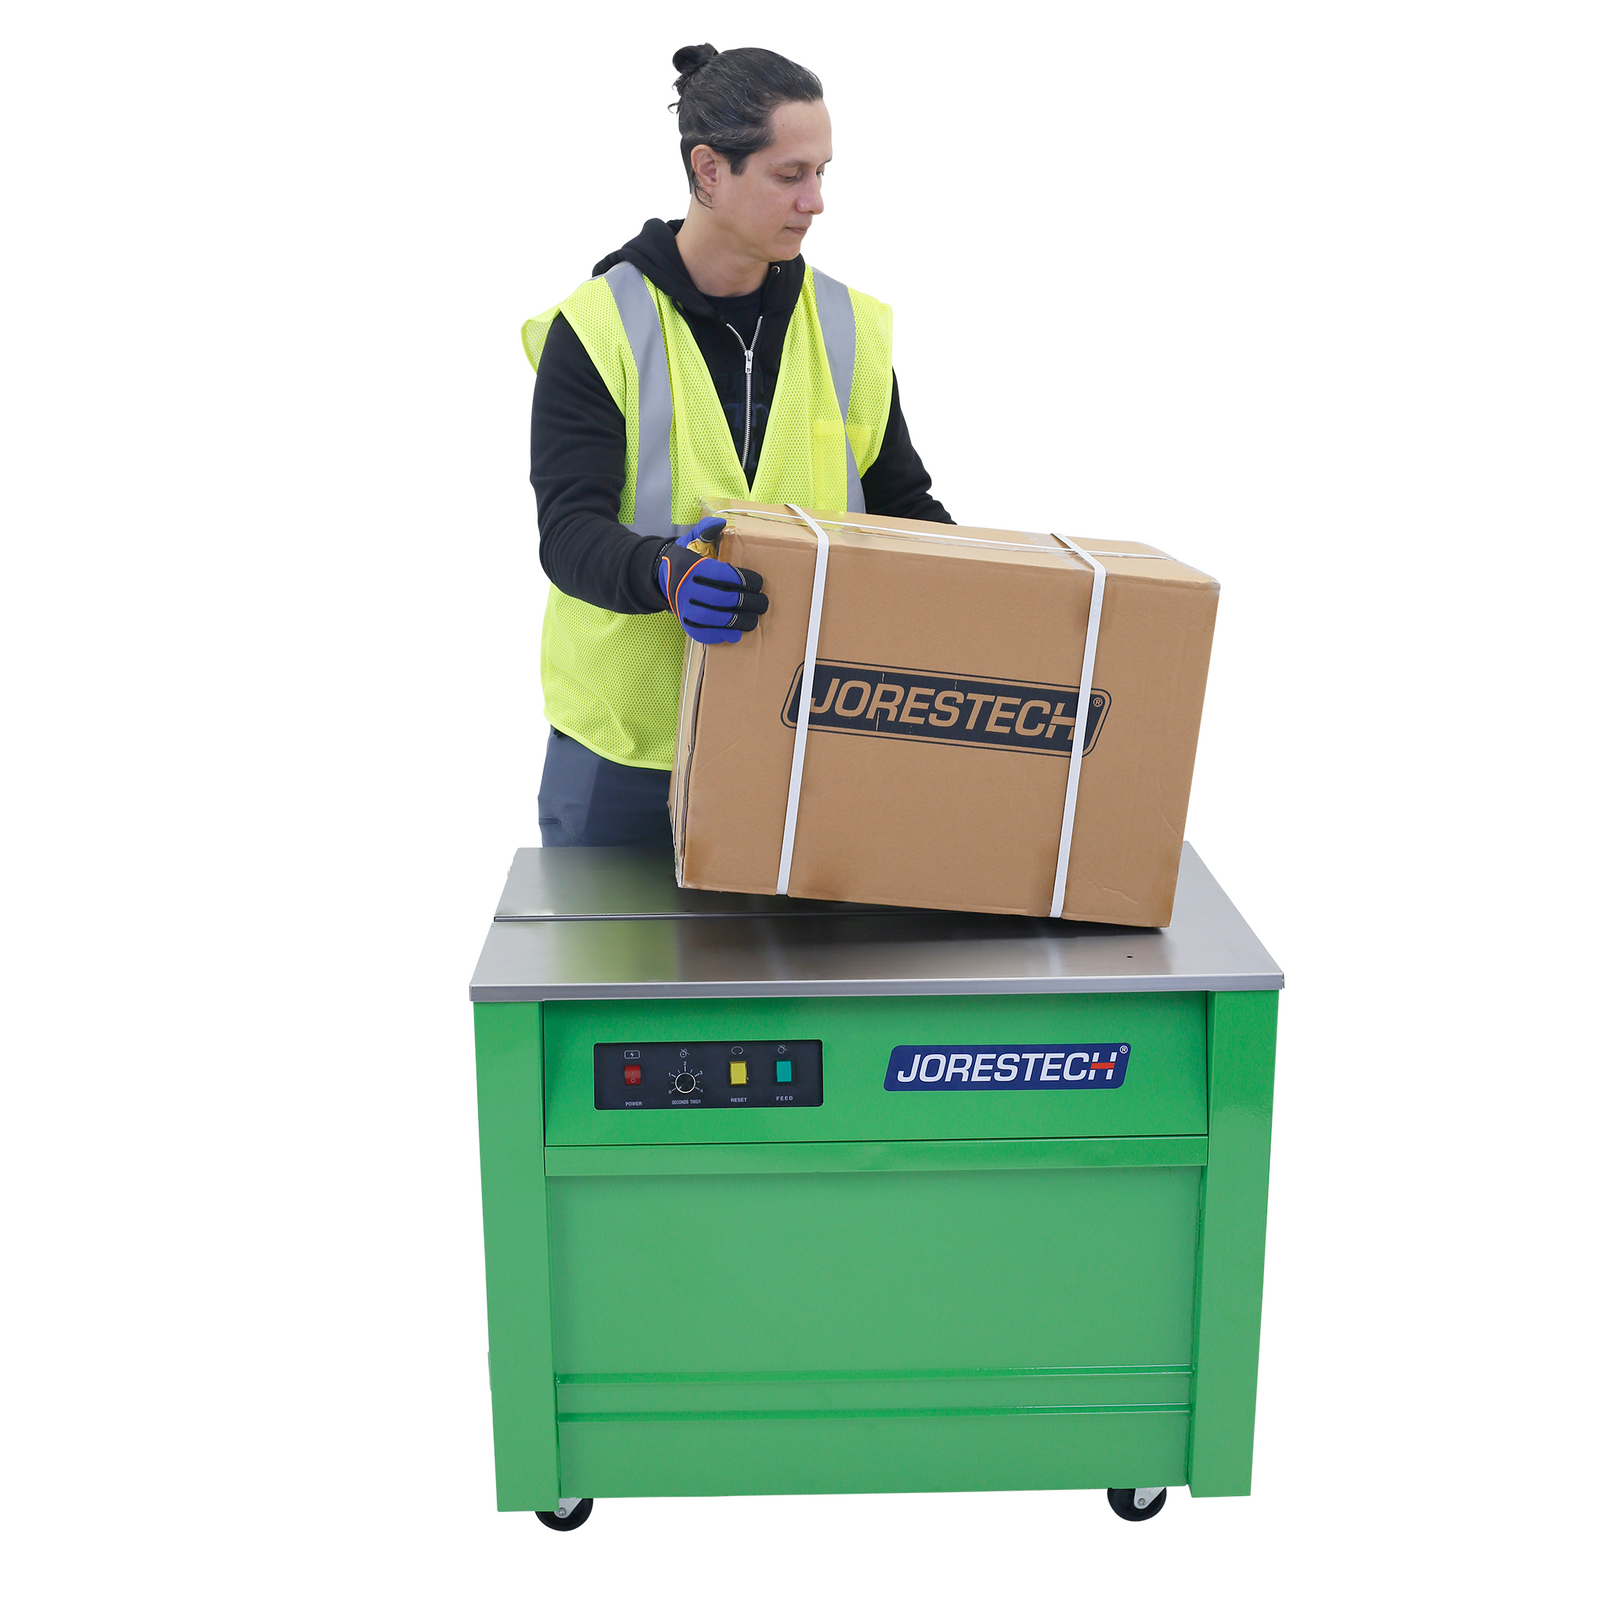 Worker operating a green Joresteck semi automatic poly strapping machine with wheels. He has a carton box positioned on top of the machine with 3 poly straps securing the box around